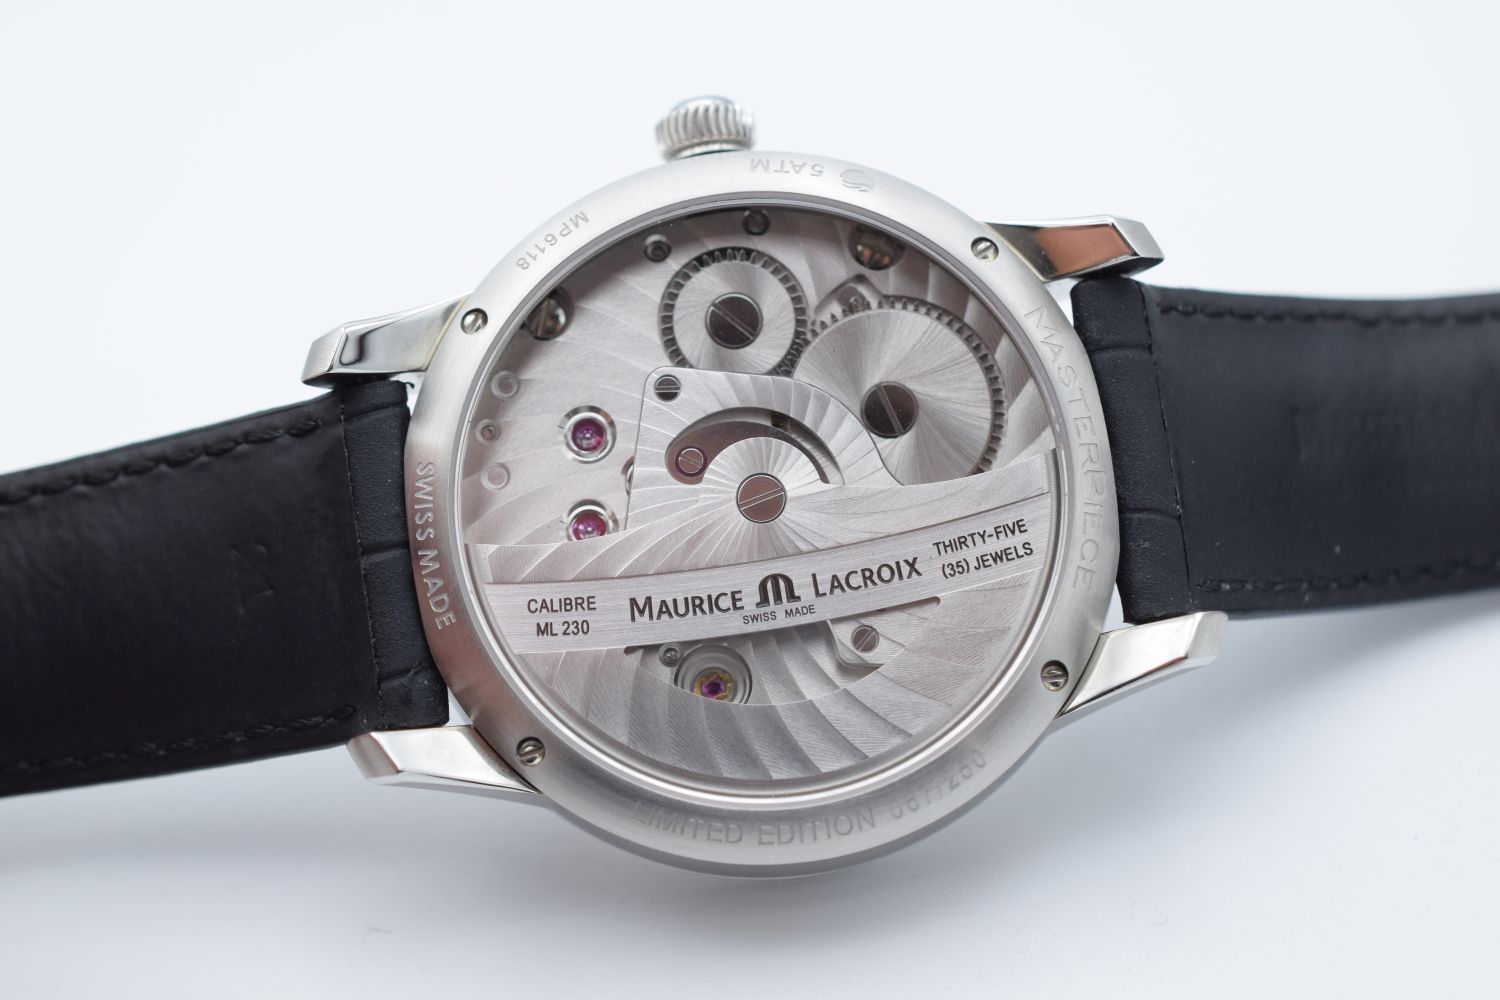 GENTLEMAN'S MAURICE LACROIX MATERPIECE GRAVITY LIMITED EDITION, AUTOMATIC MANUFACTURE ML230, - Image 8 of 8